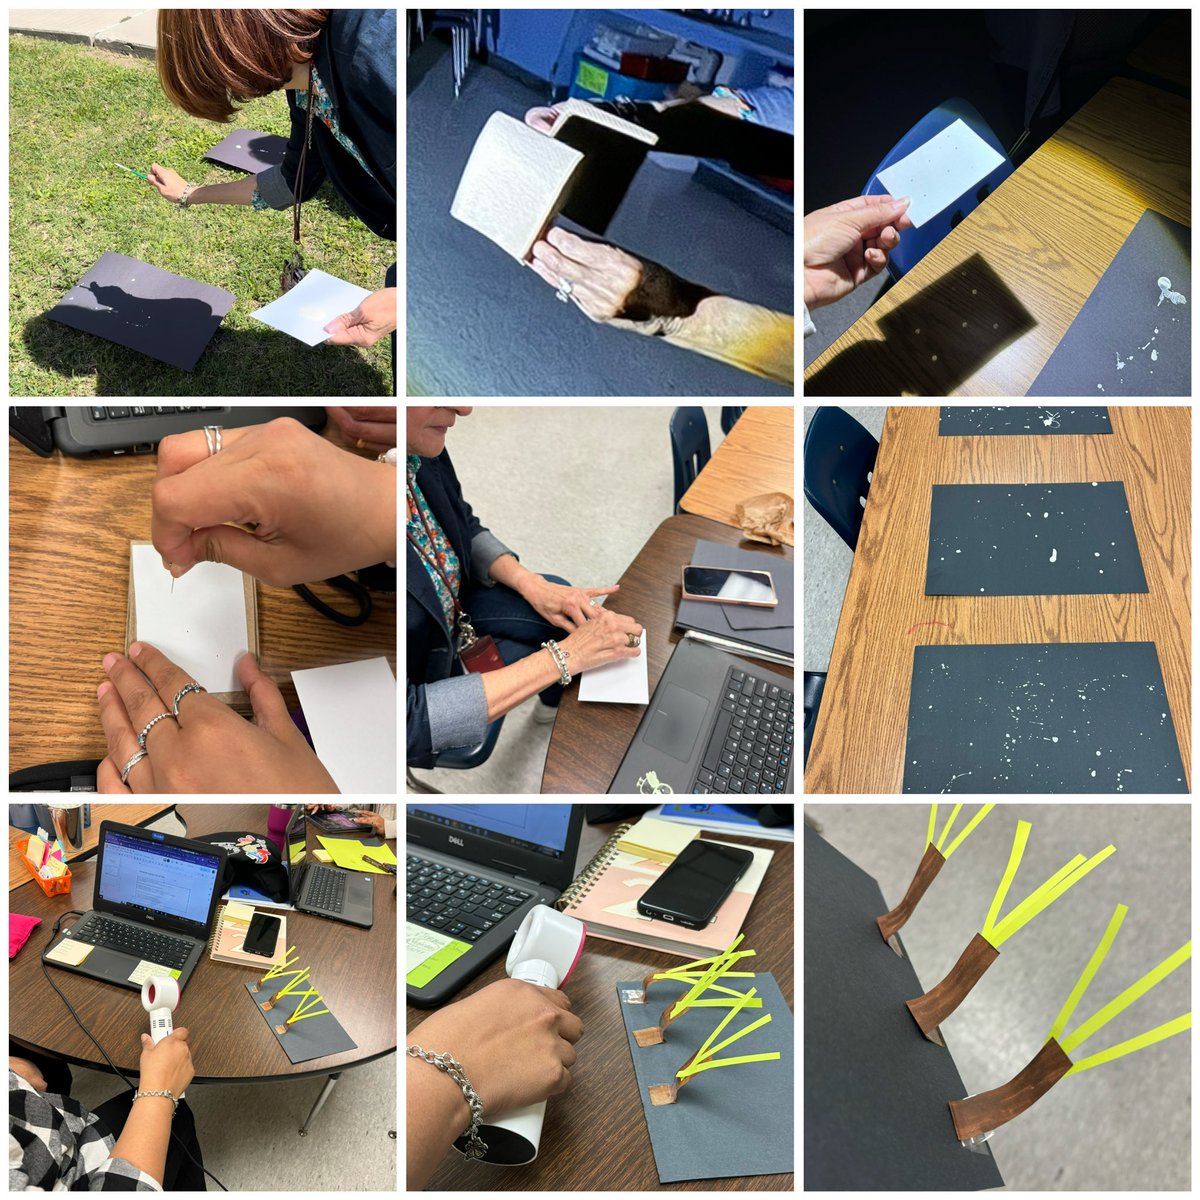 CBPLs @Carter_AISD SLA teachers prepared hands on experiences for the classroom; night skies, solar eclipse, constellations, strong winds, erosion and more. Shout out @MissDe1gado our Art teacher for providing supplies to our CBPL!!! @CindyBuentello5